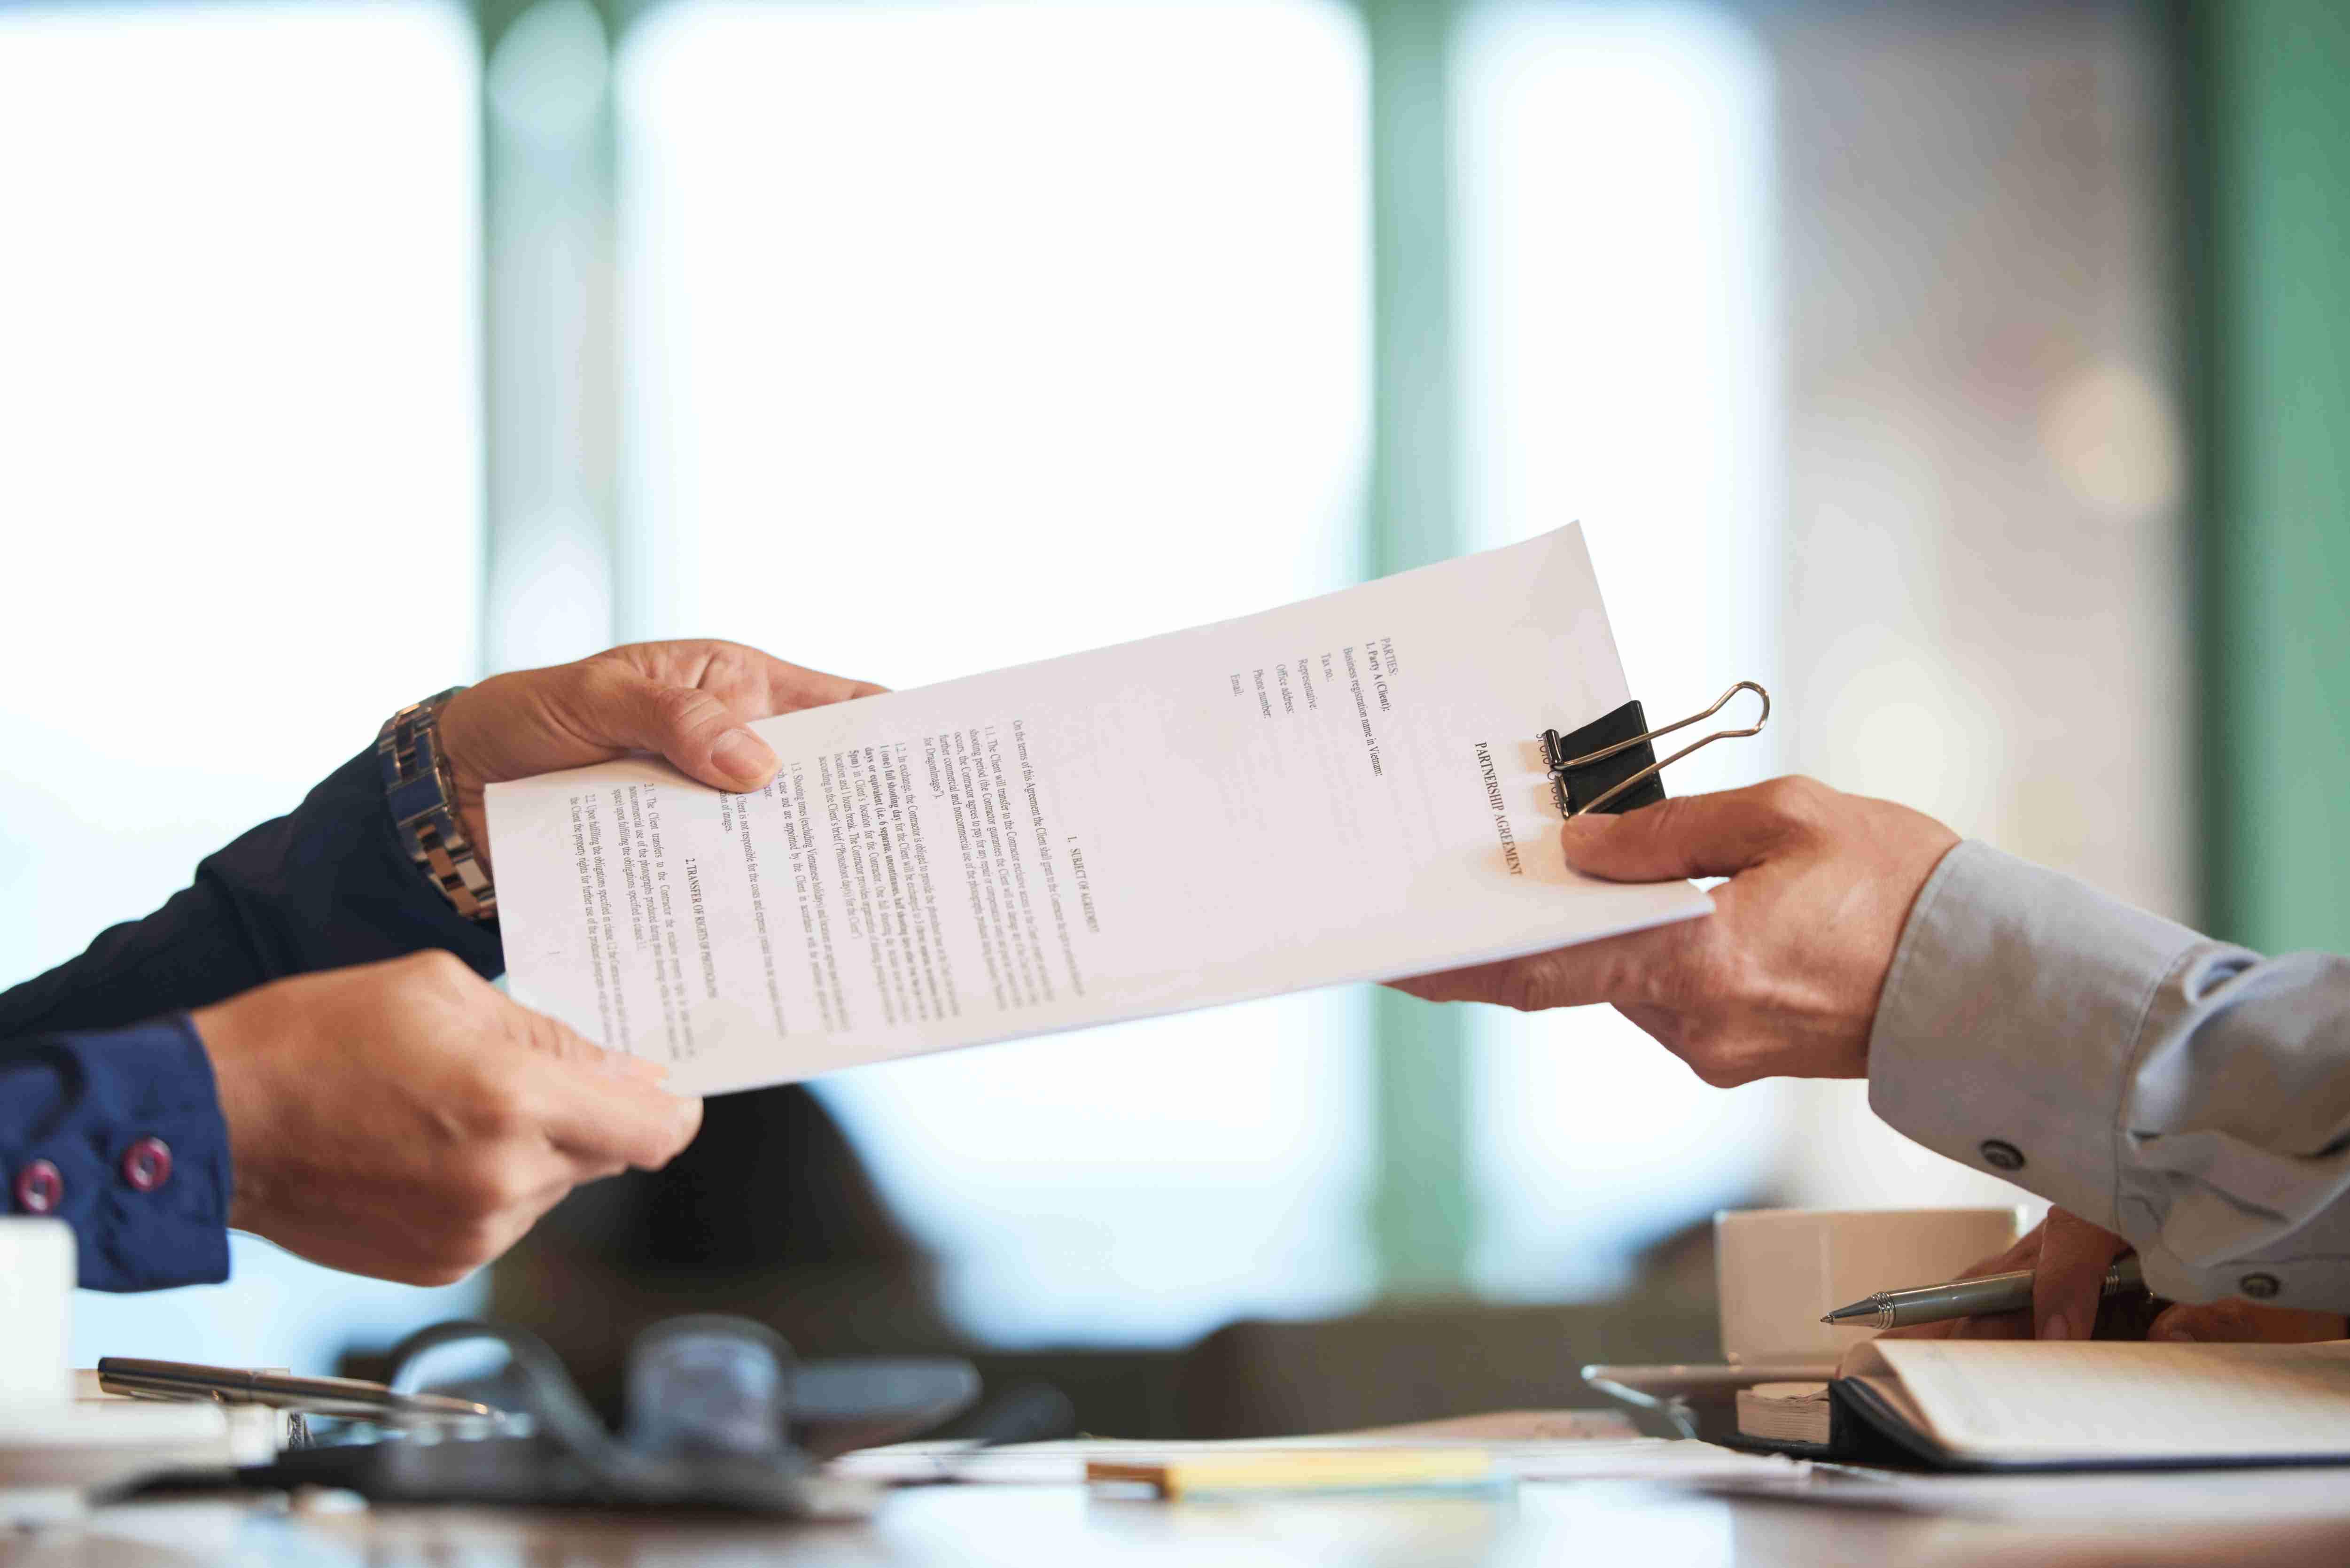 All you need to know about the Contract Attorney services